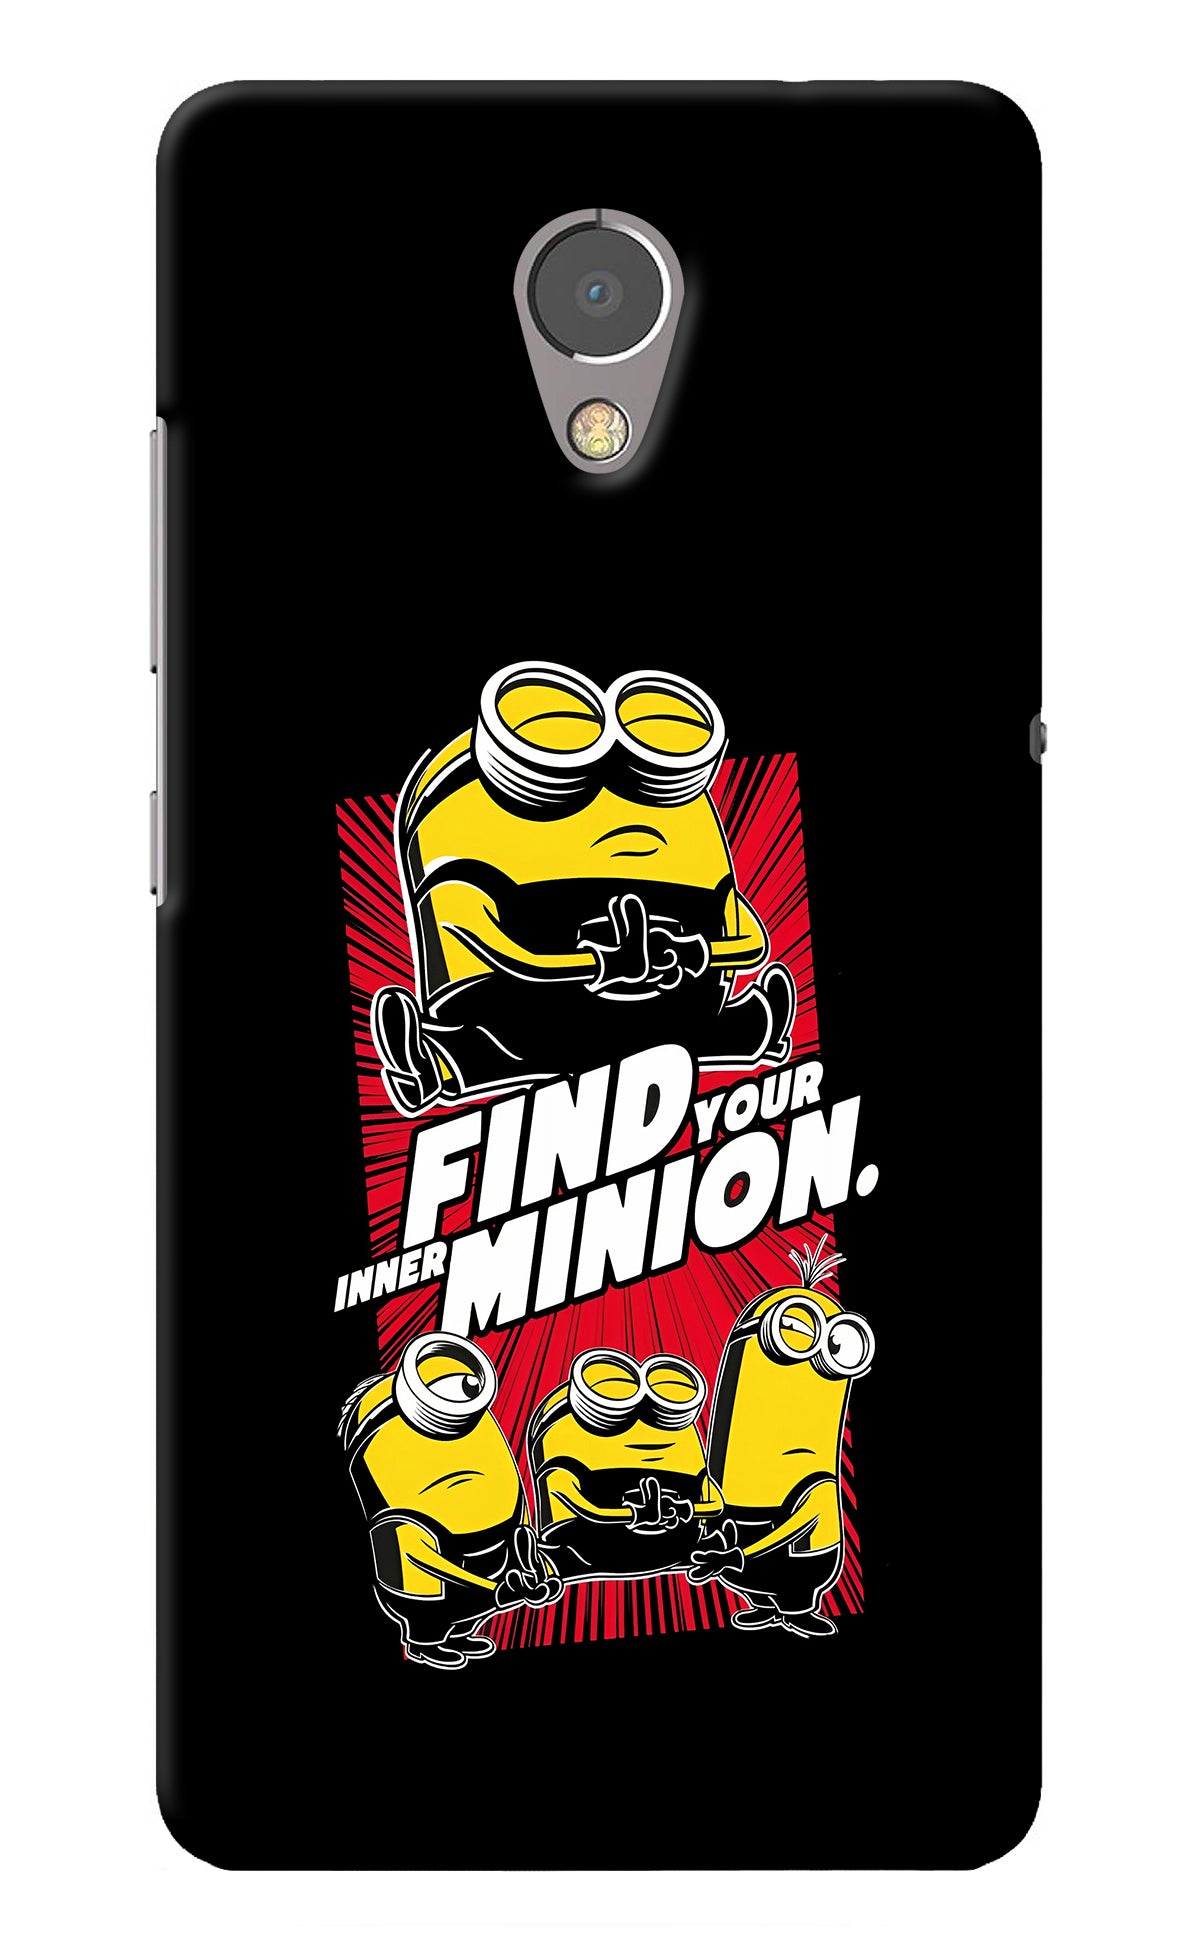 Find your inner Minion Lenovo P2 Back Cover